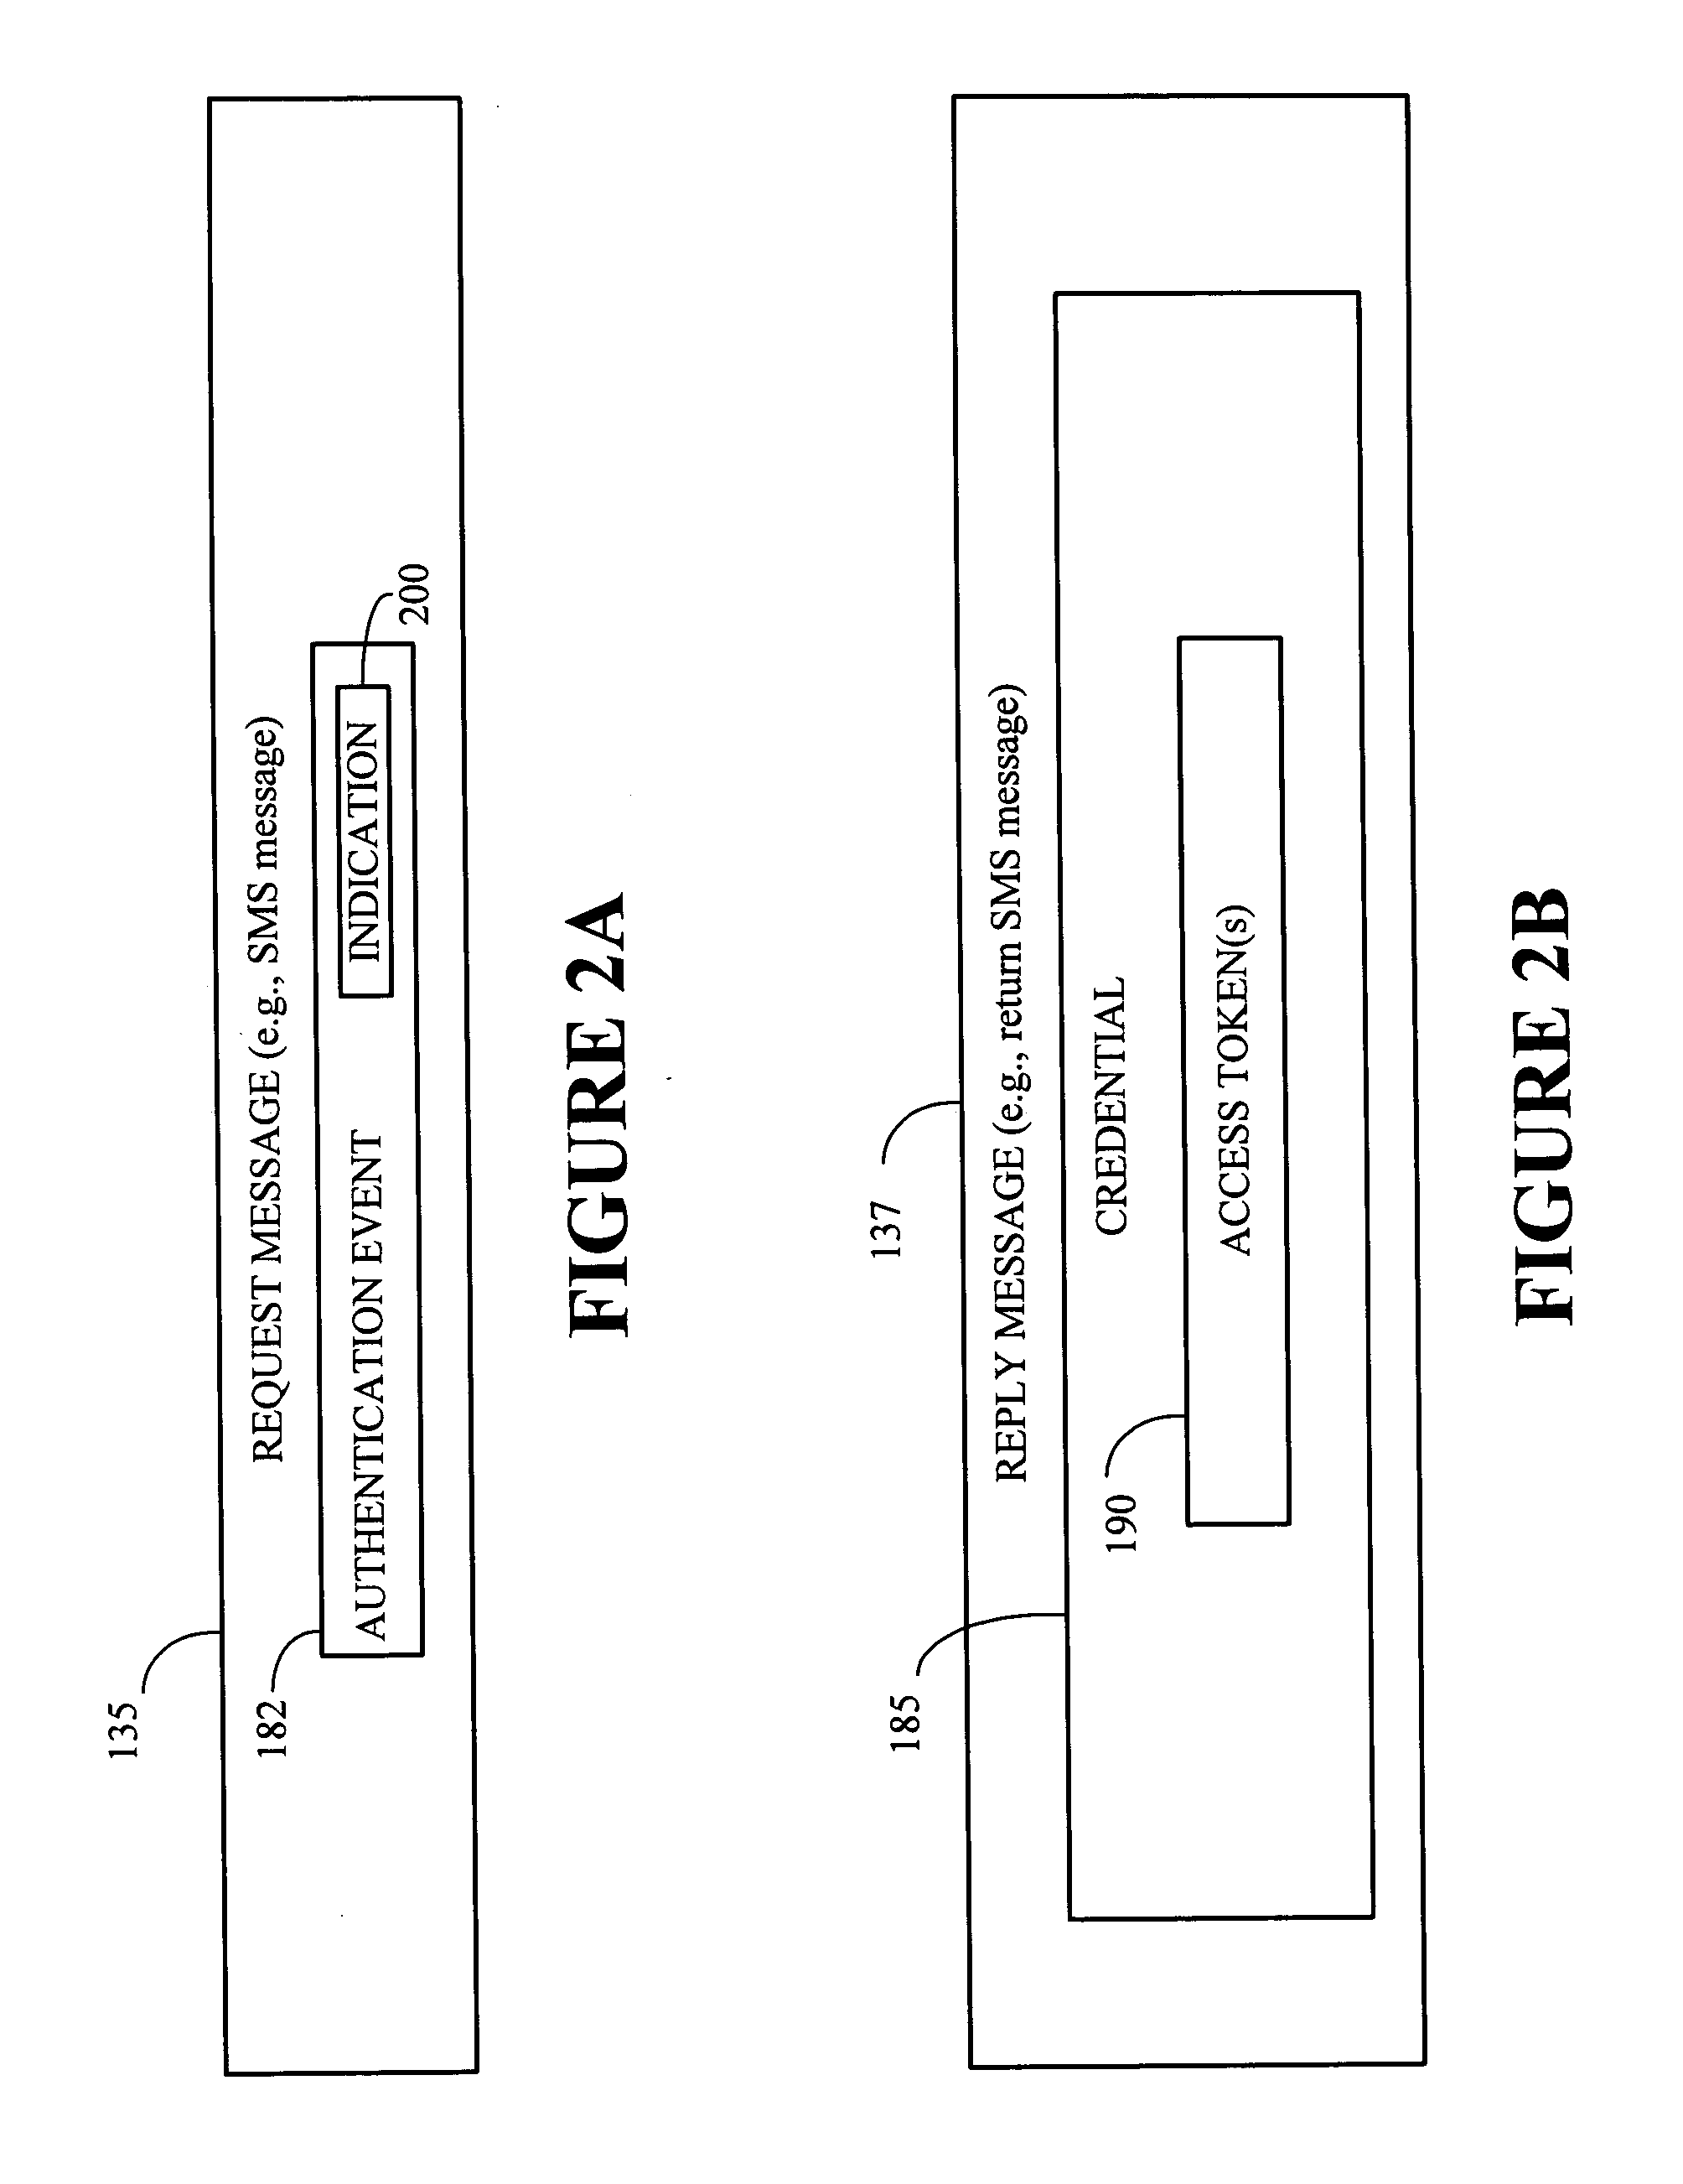 Authenticating a user of a communication device to a wireless network to which the user is not associated with